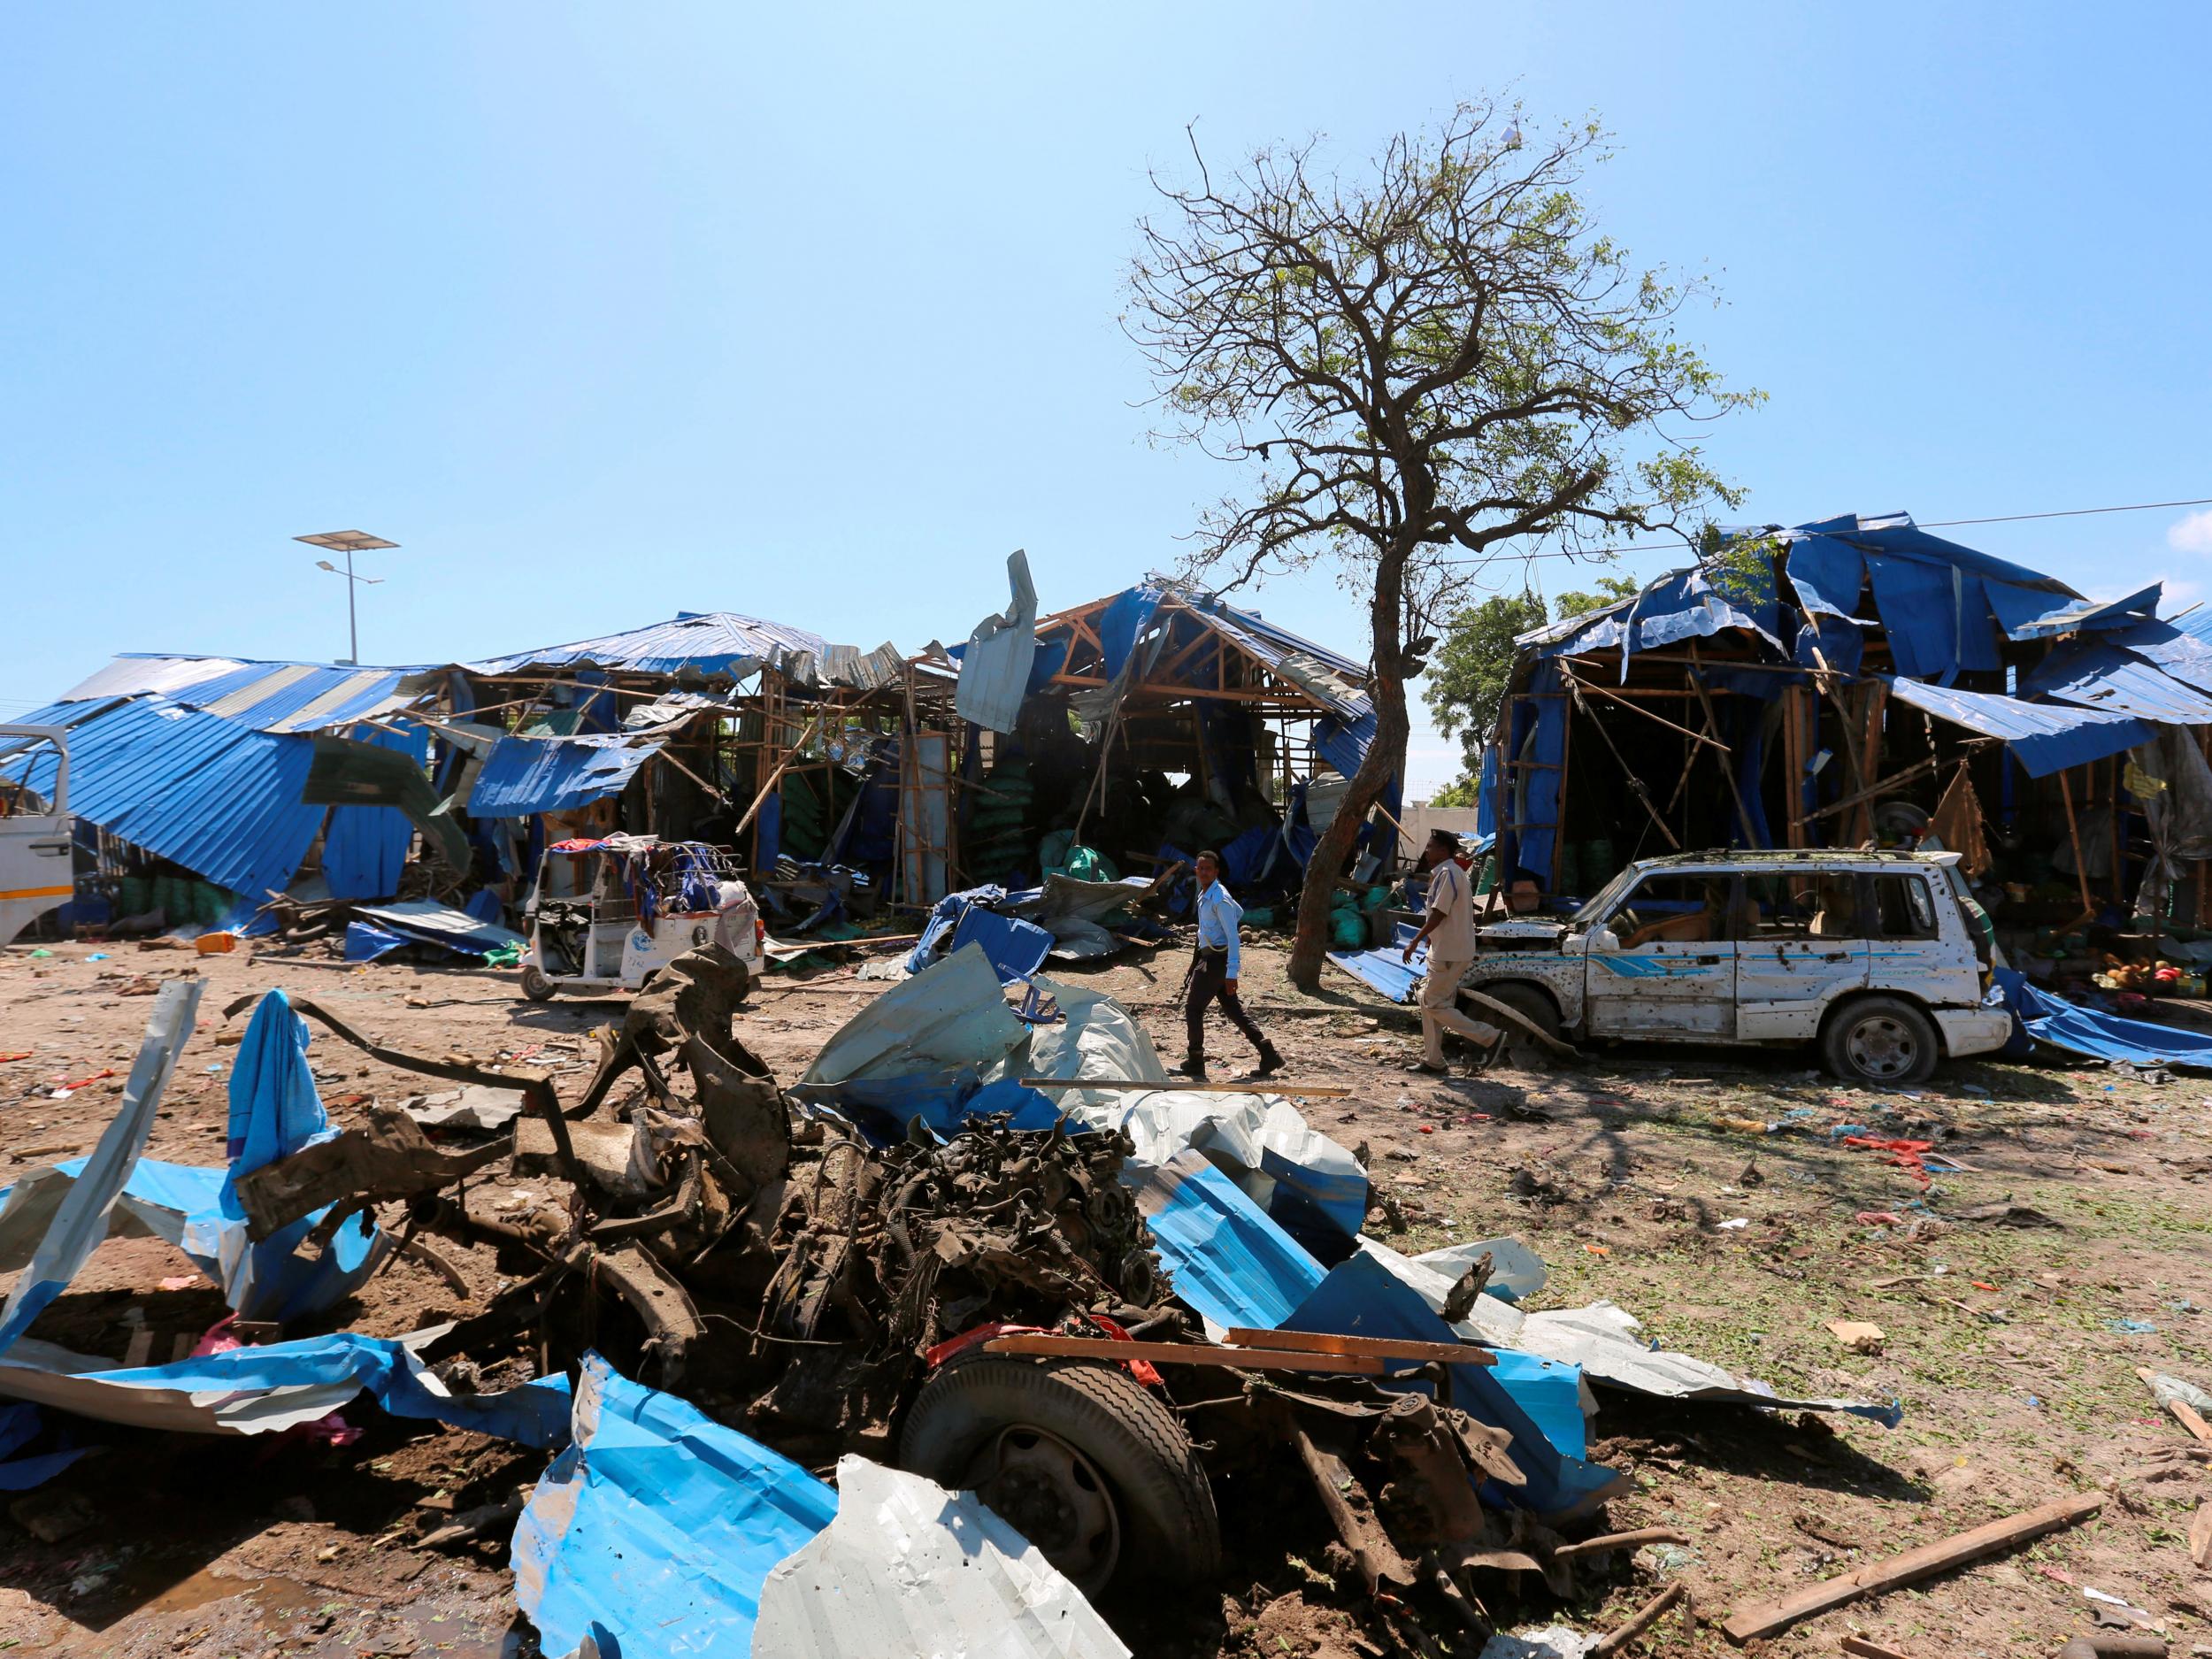 Somalia's capital has seen frequent bomb attacks at hotels and military checkpoints, threatening attempts to rebuild from decades of chaos. In this photo, a Somali policeman walks near destroyed cars at a police checkpoint near a vegetable market.